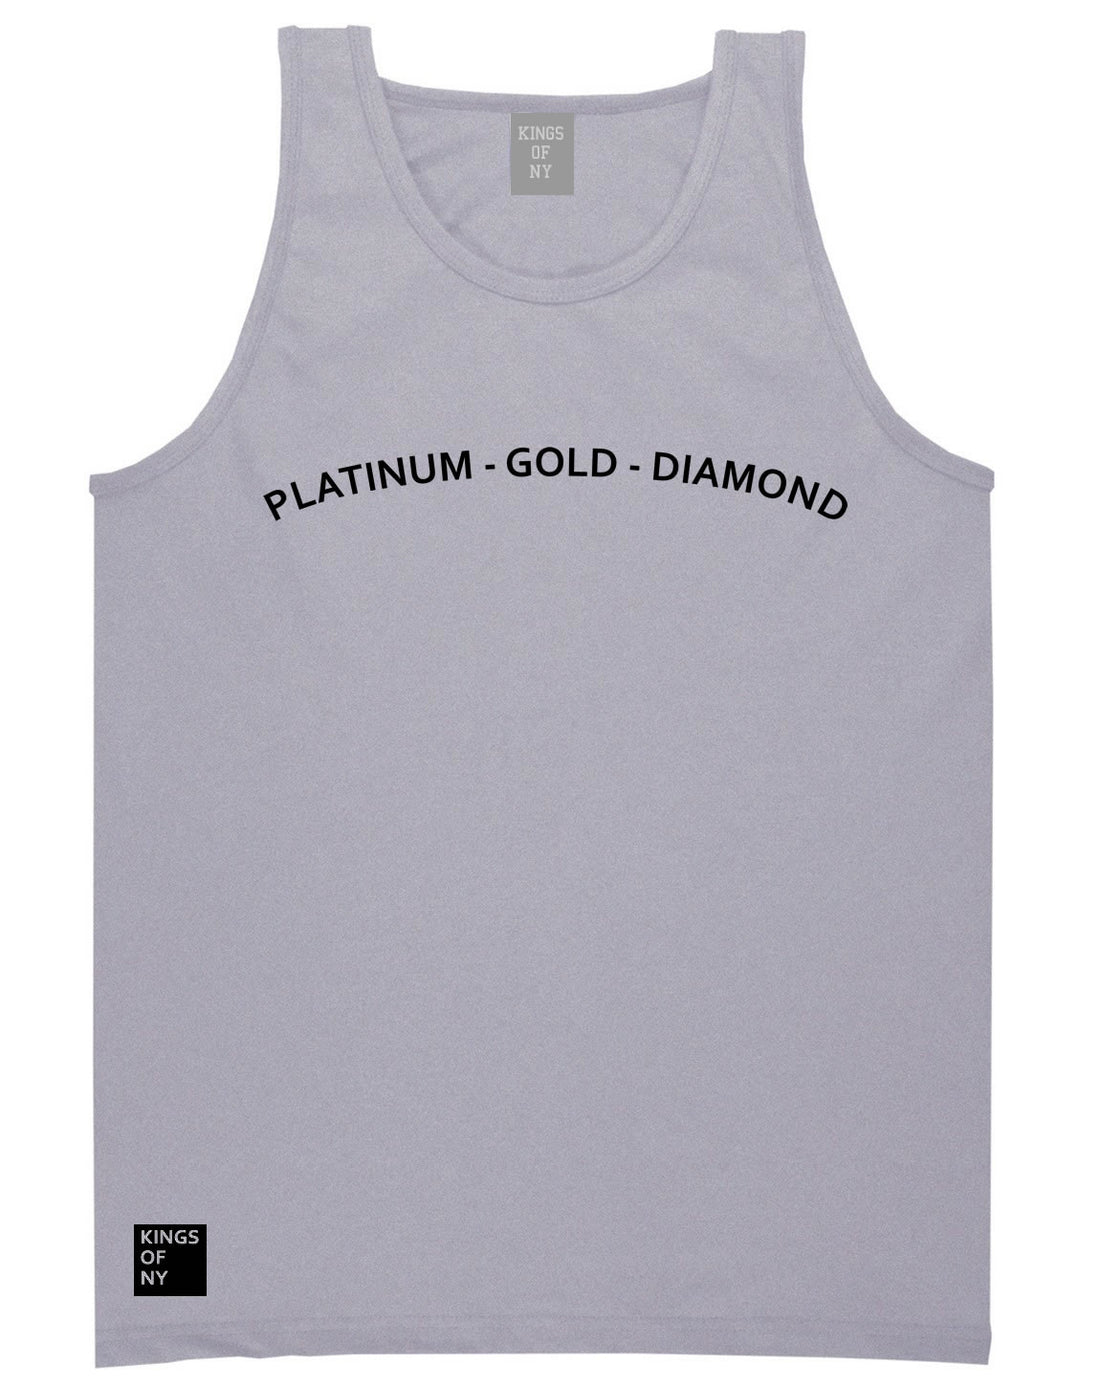 Platinum Gold Diamond Tank Top in Grey by Kings Of NY